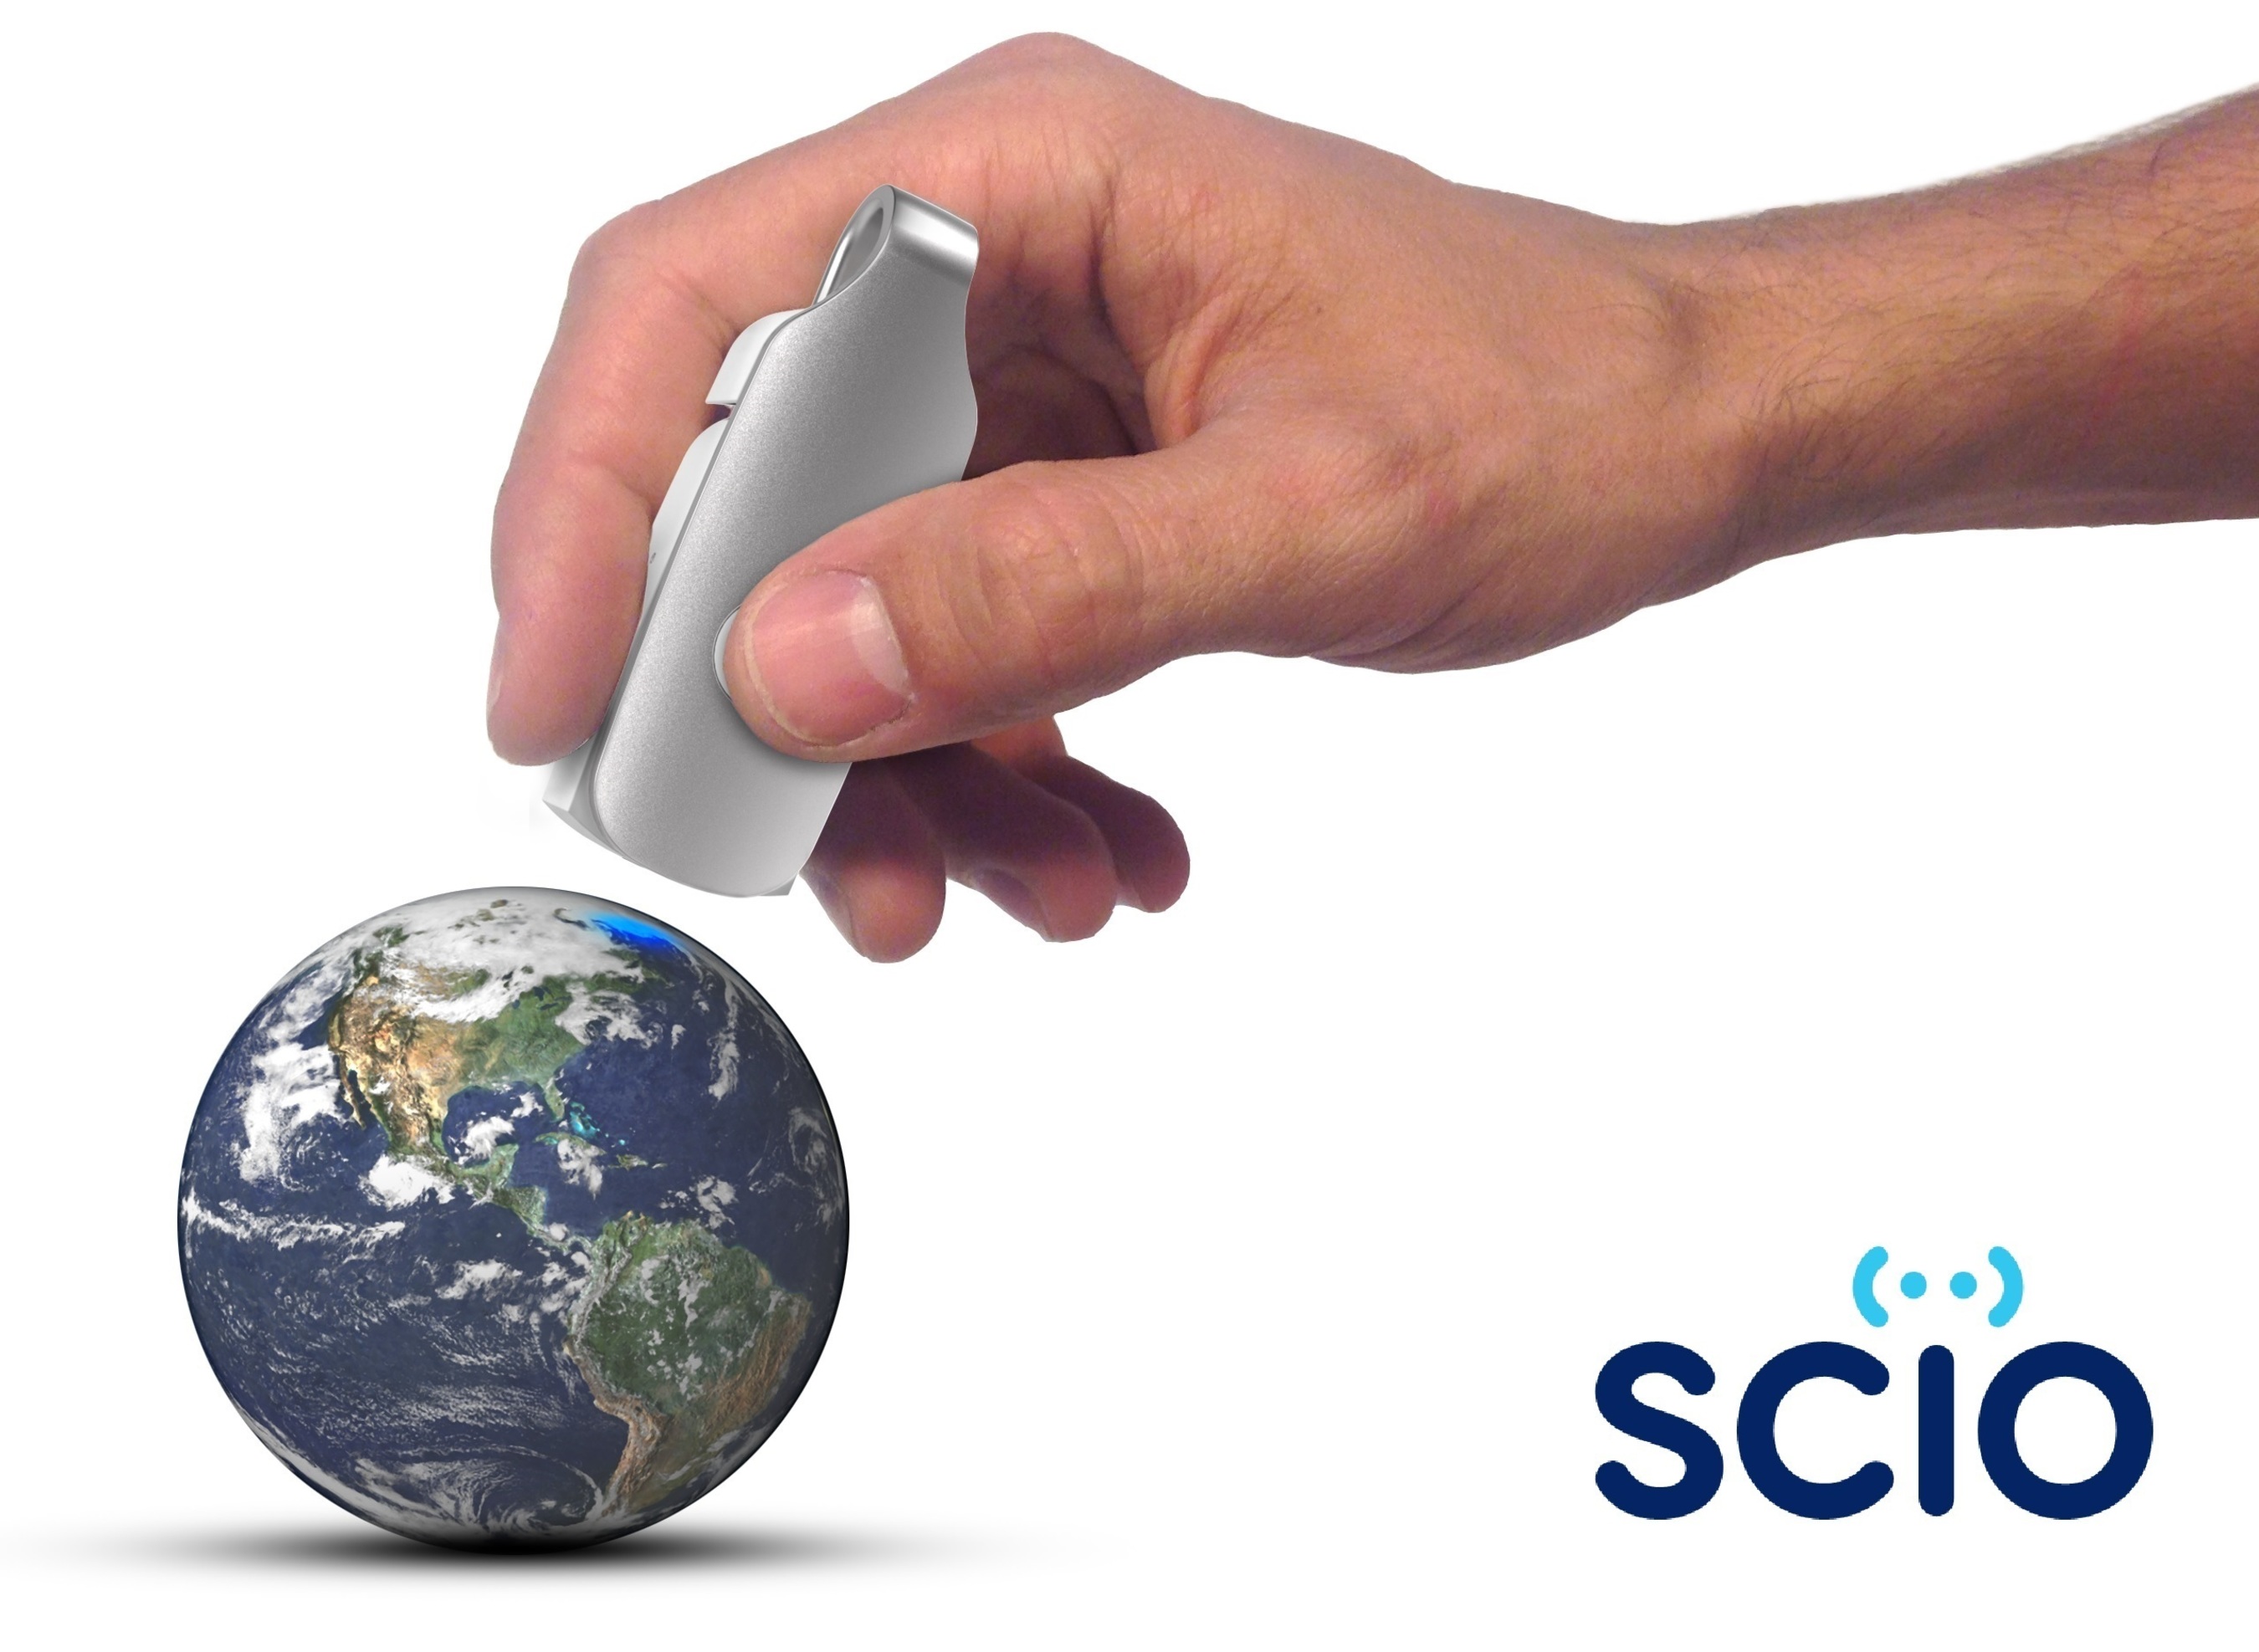 SCiO is the world's first handheld sensor that scans the molecular fingerprint of physical matter and instantly provides useful information about its chemical makeup. Pre-order your SCiO or your own SCiO development kit on Kickstarter today! (PRNewsFoto/Consumer Physics)